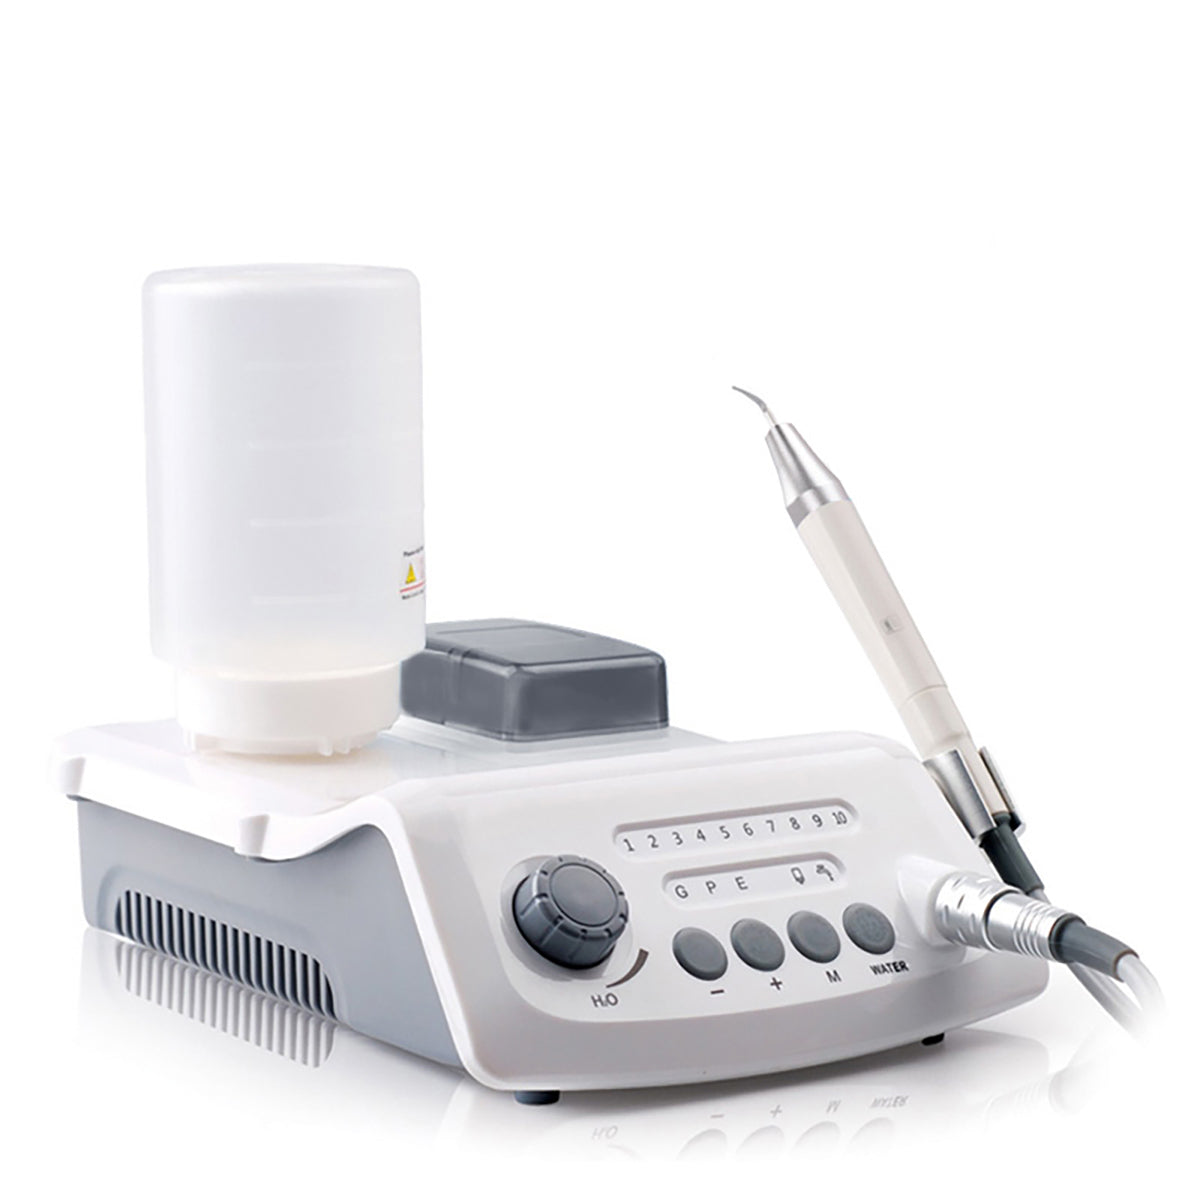 VRN Ultrasonic Scaler Wireless Control Detachable LED Handpiece and Handle Line - pairaydental.com